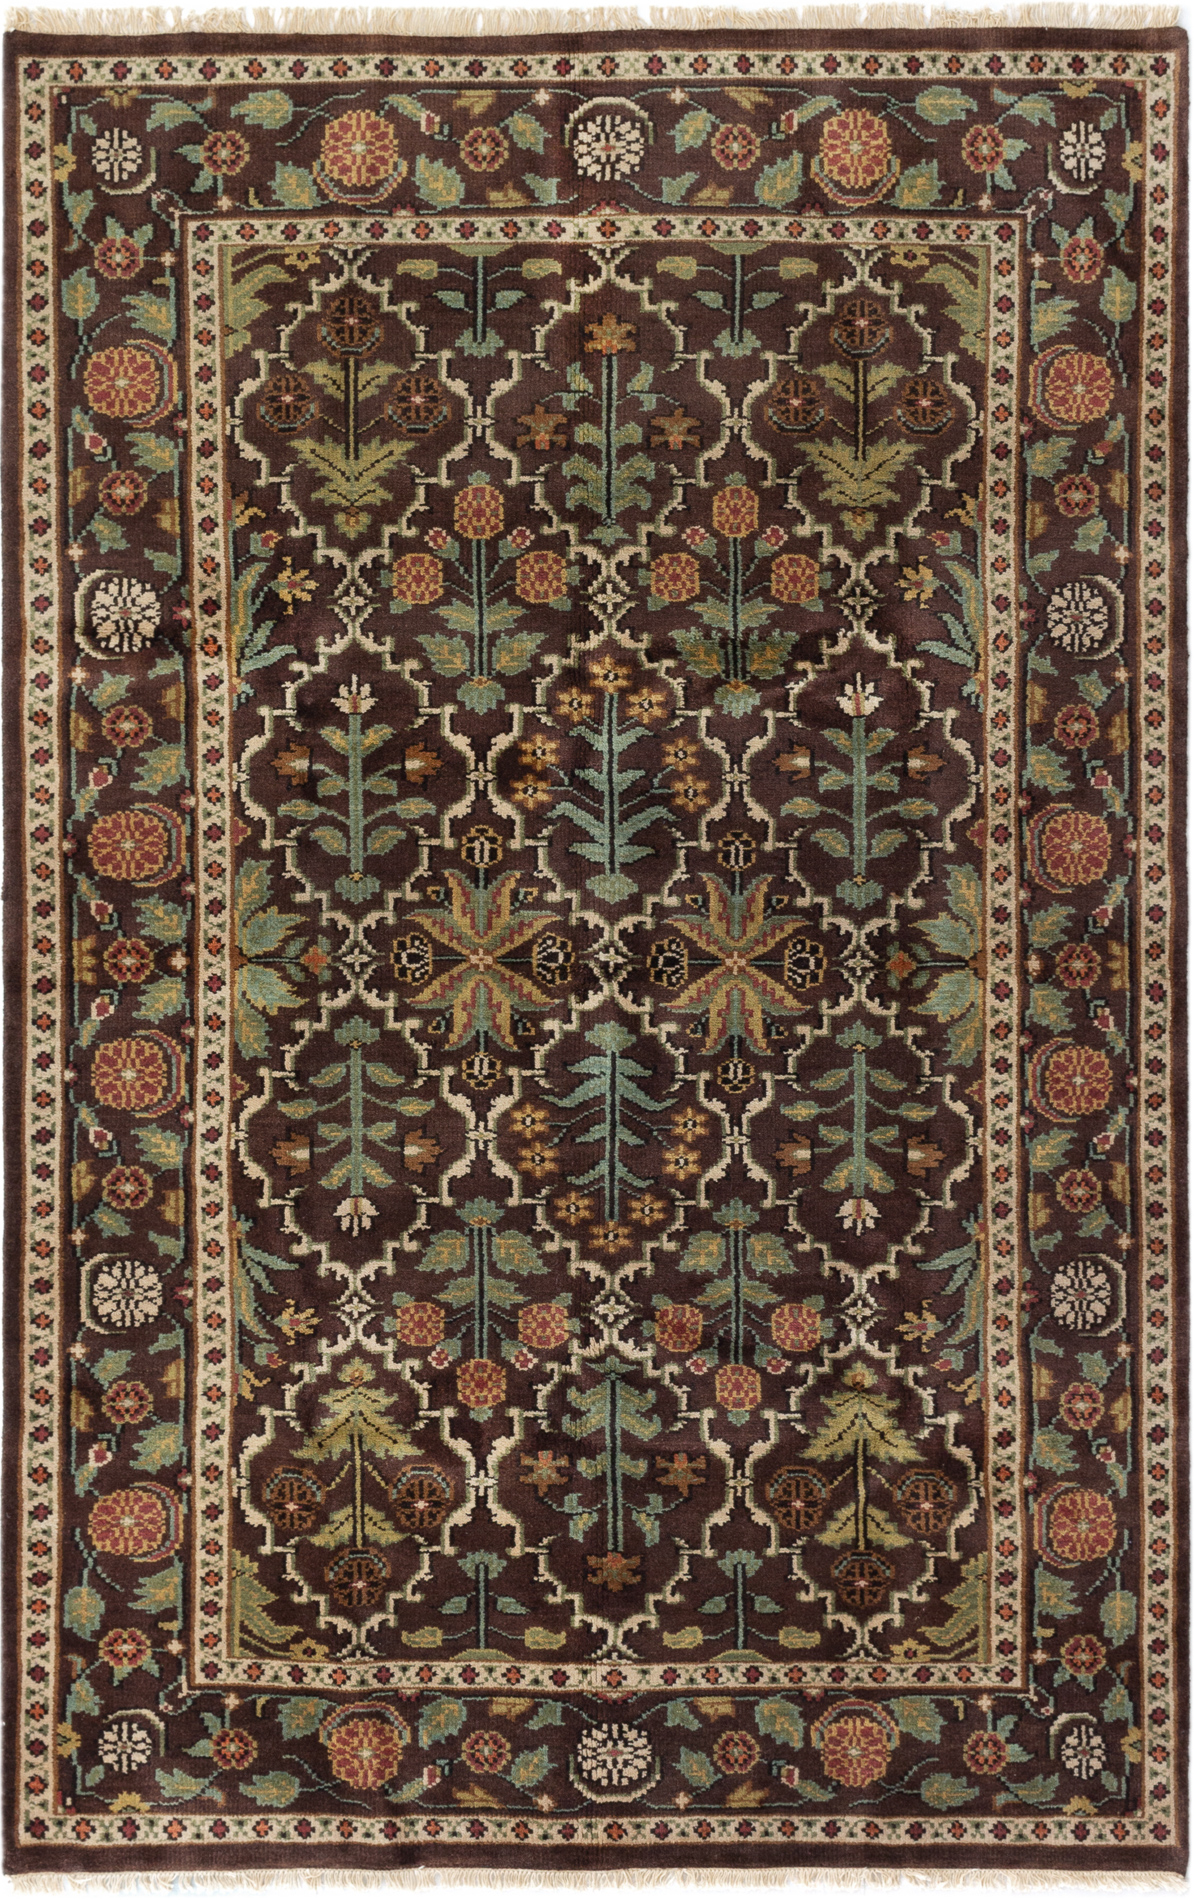 Hand-knotted Royal Mahal Dark Brown Wool Rug 5'5" x 8'6" Size: 5'5" x 8'6"  